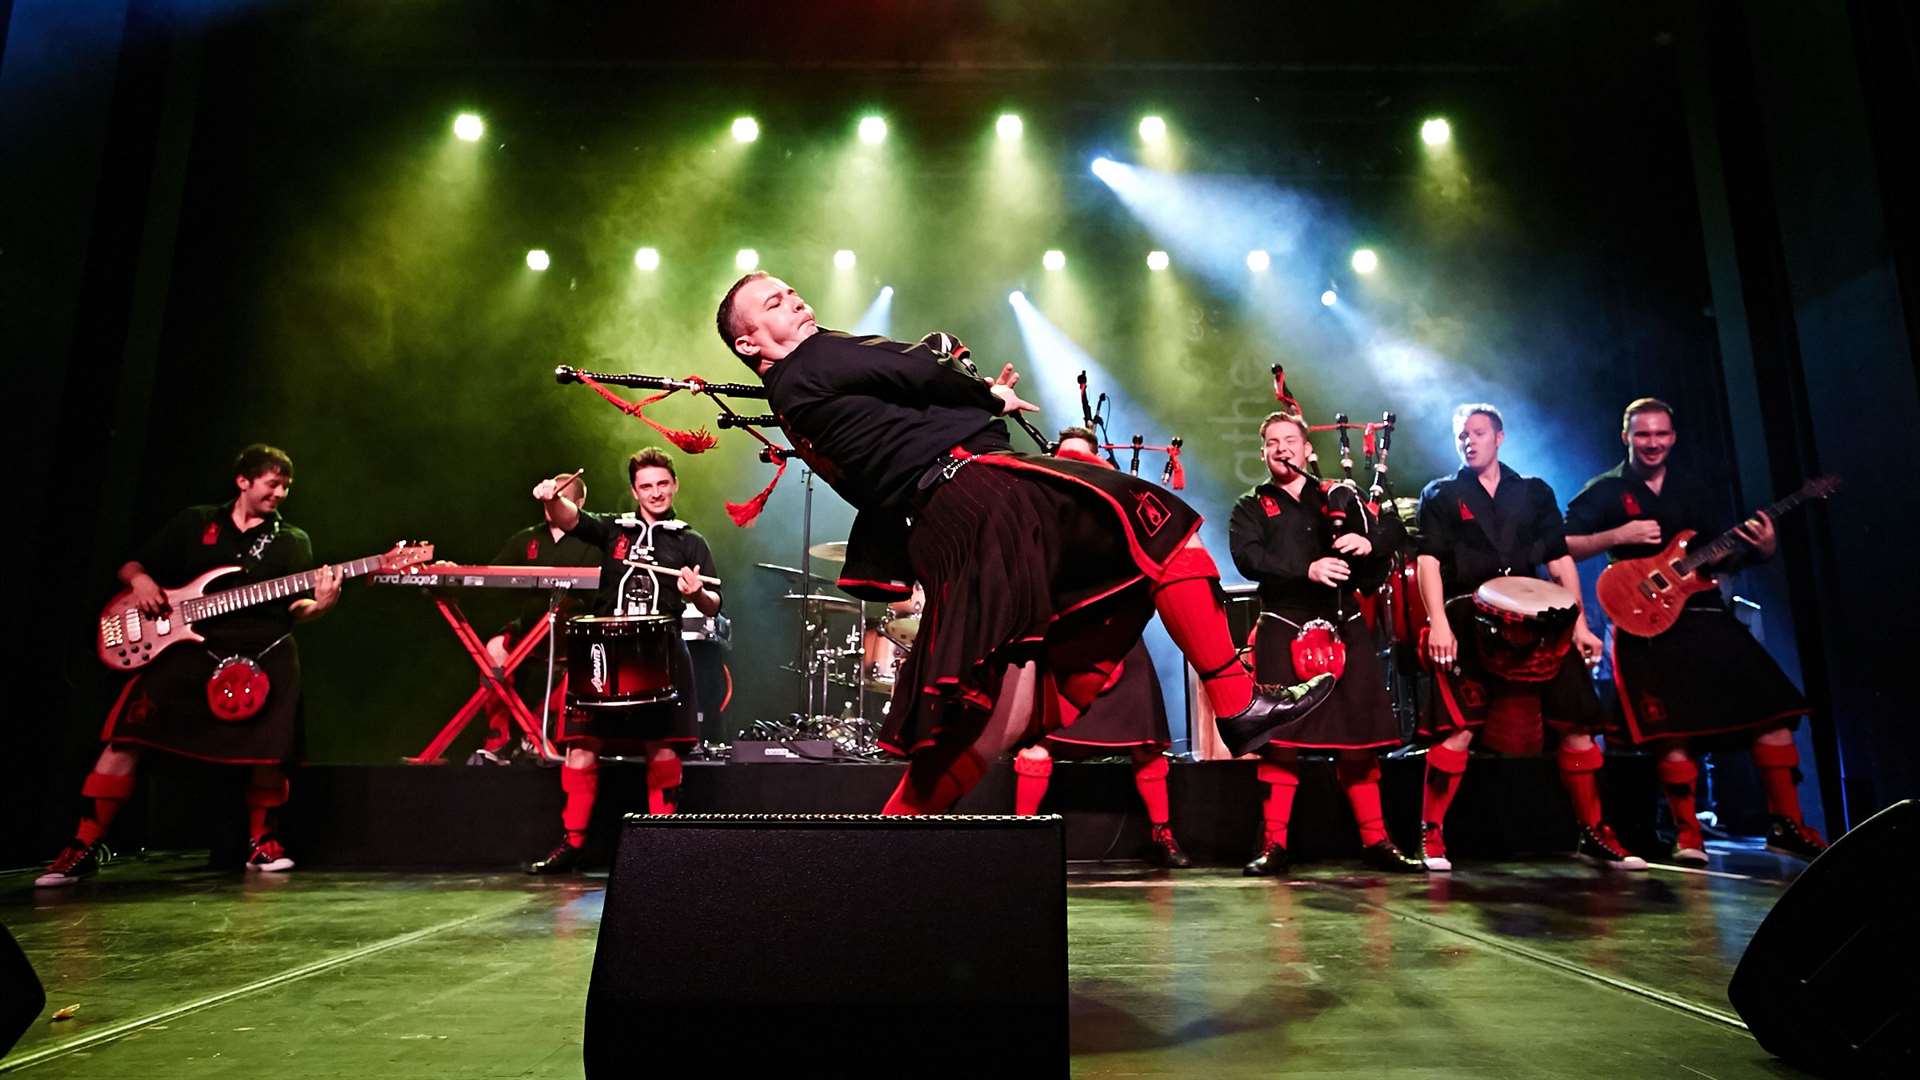 The Red Hot Chilli Pipers on stage.